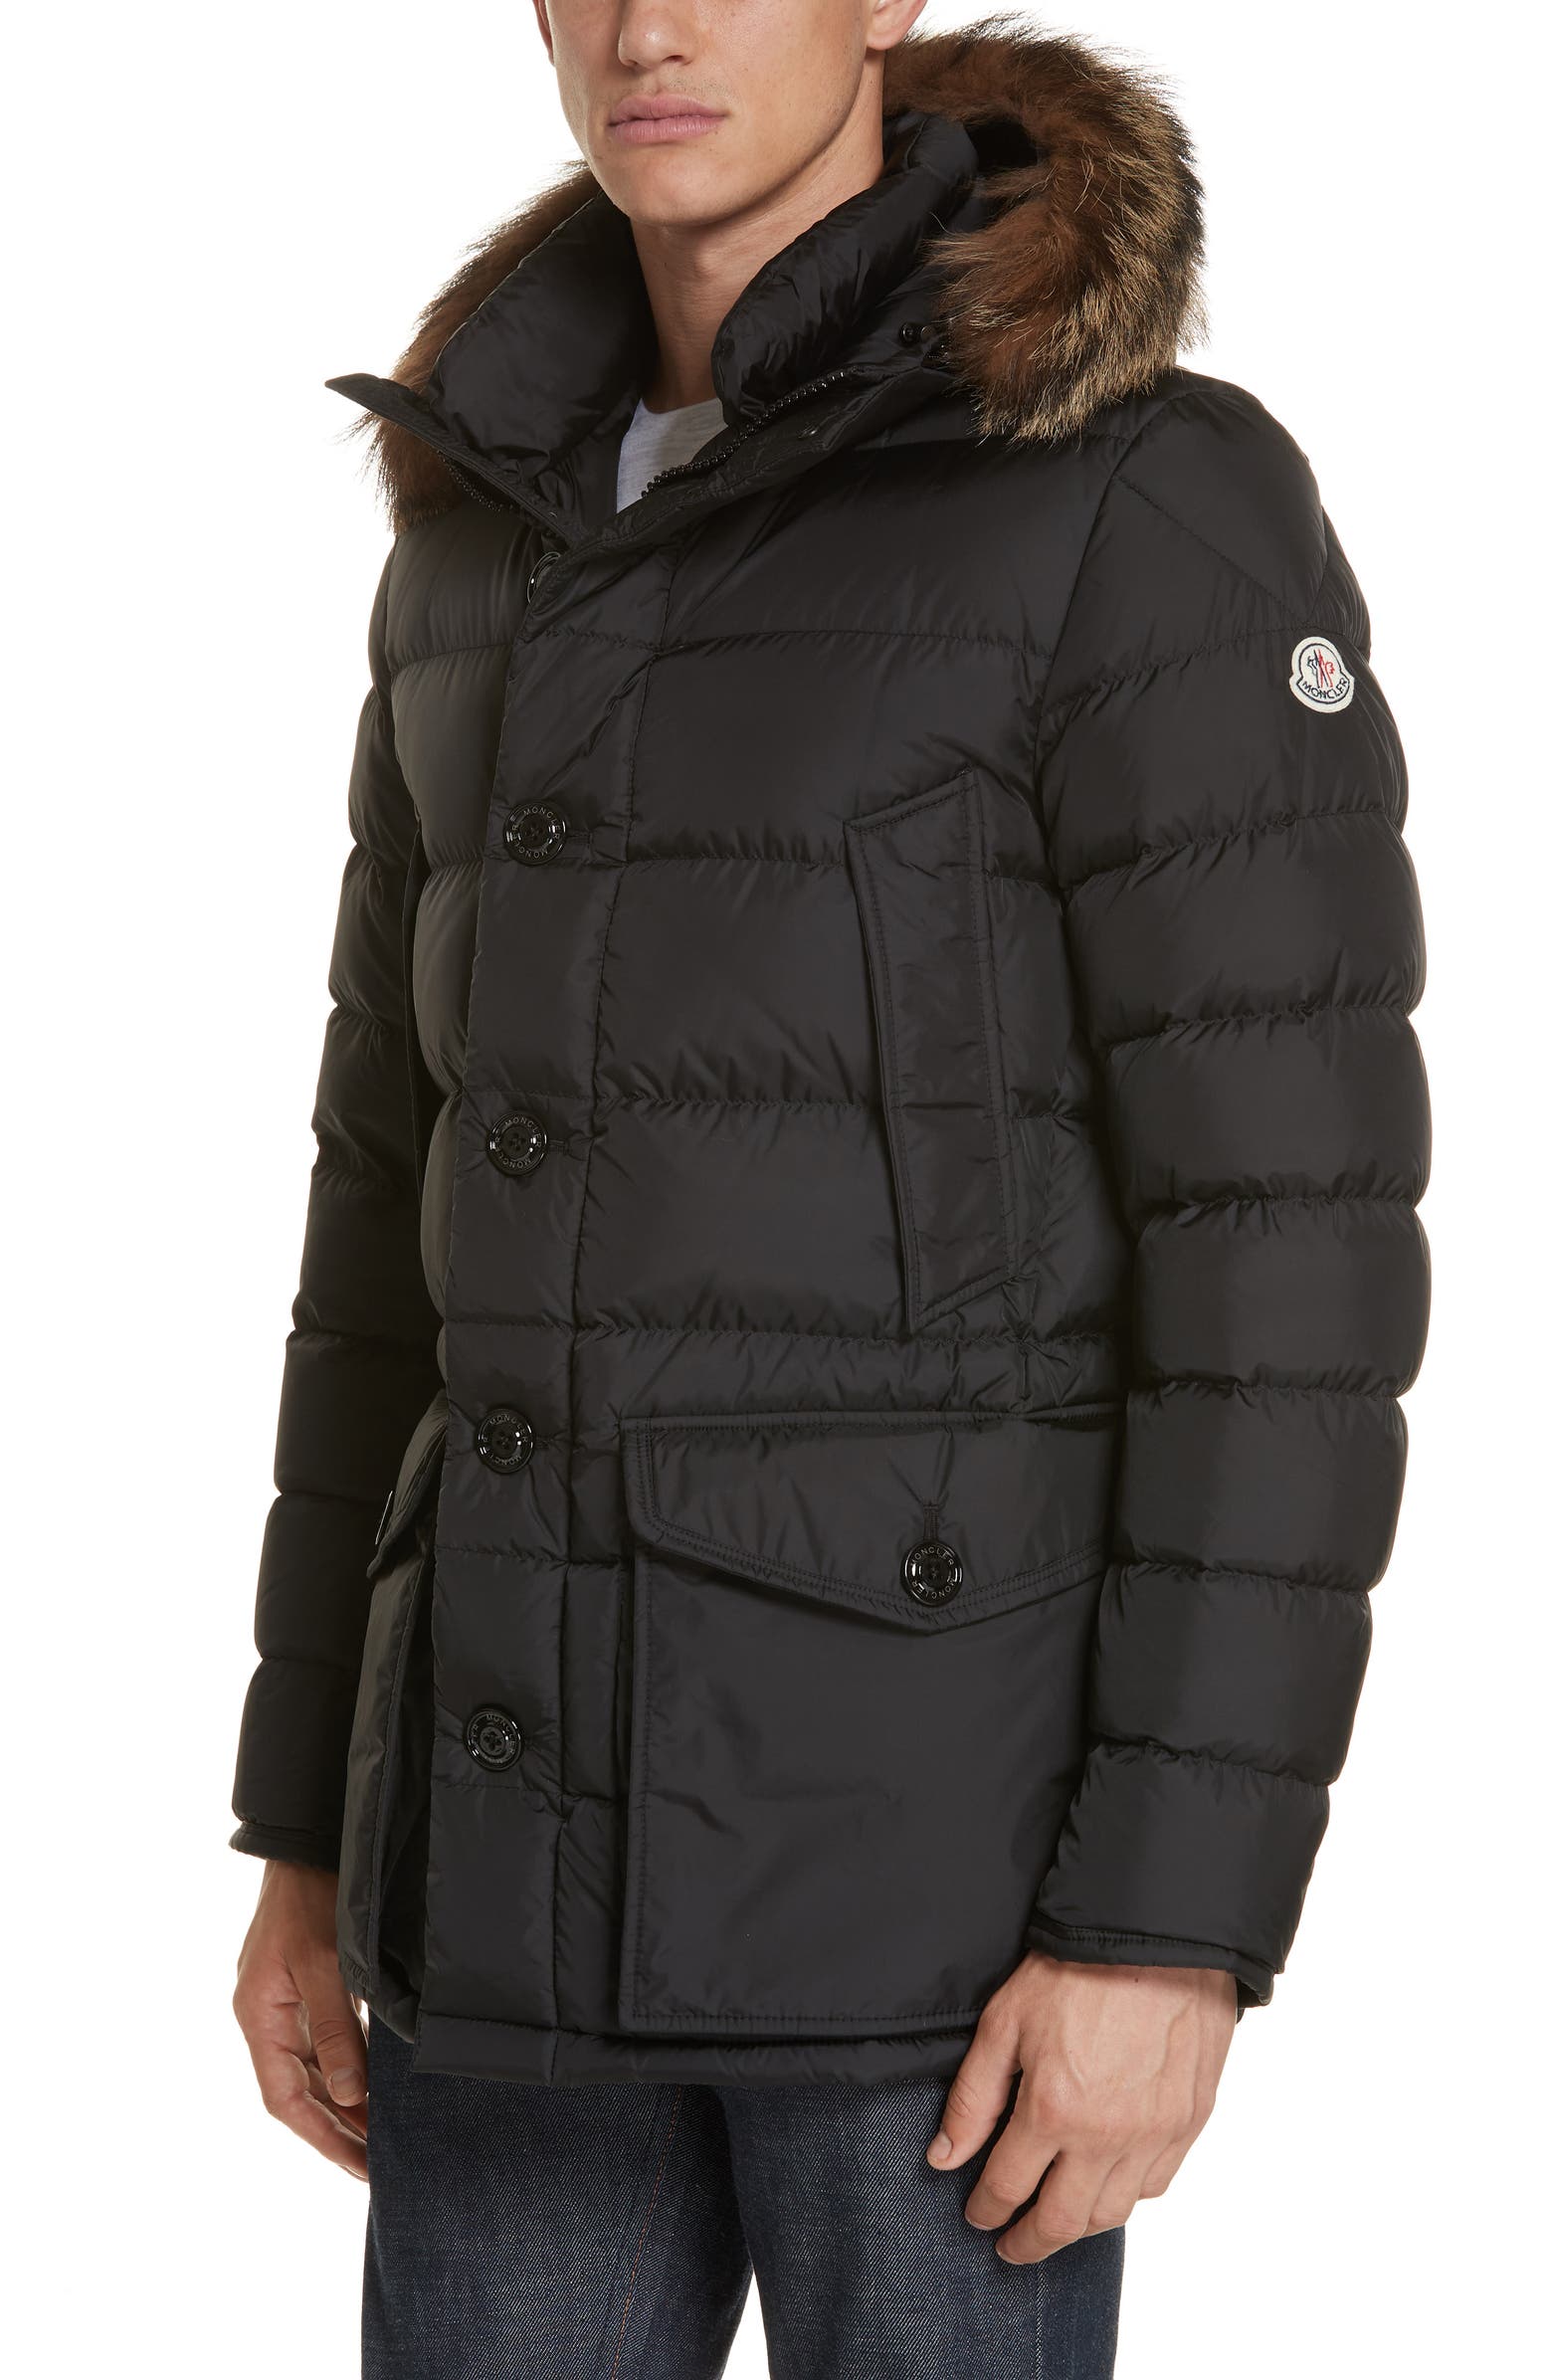 Moncler Cluny Giubbotto Down Parka with Genuine Coyote Fur Trim | Nordstrom